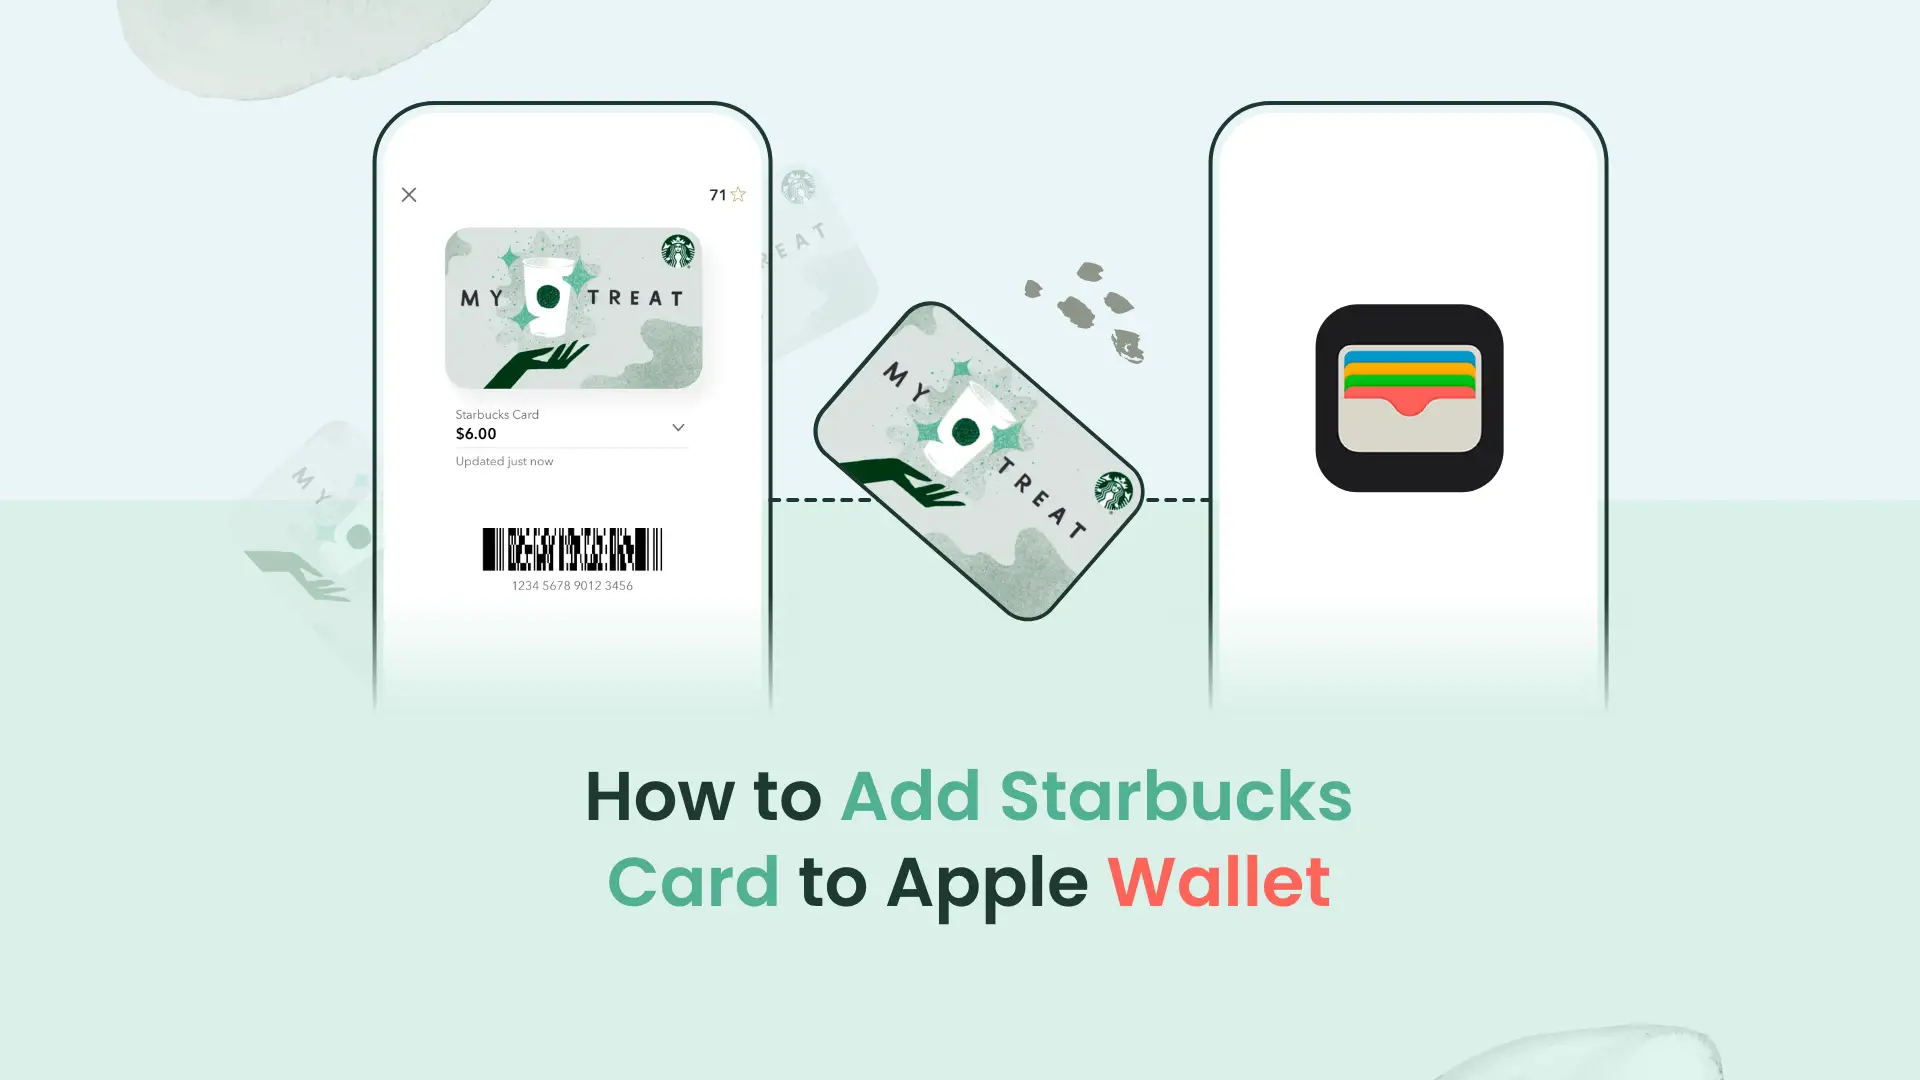 How to Add Starbucks Card to Apple Wallet